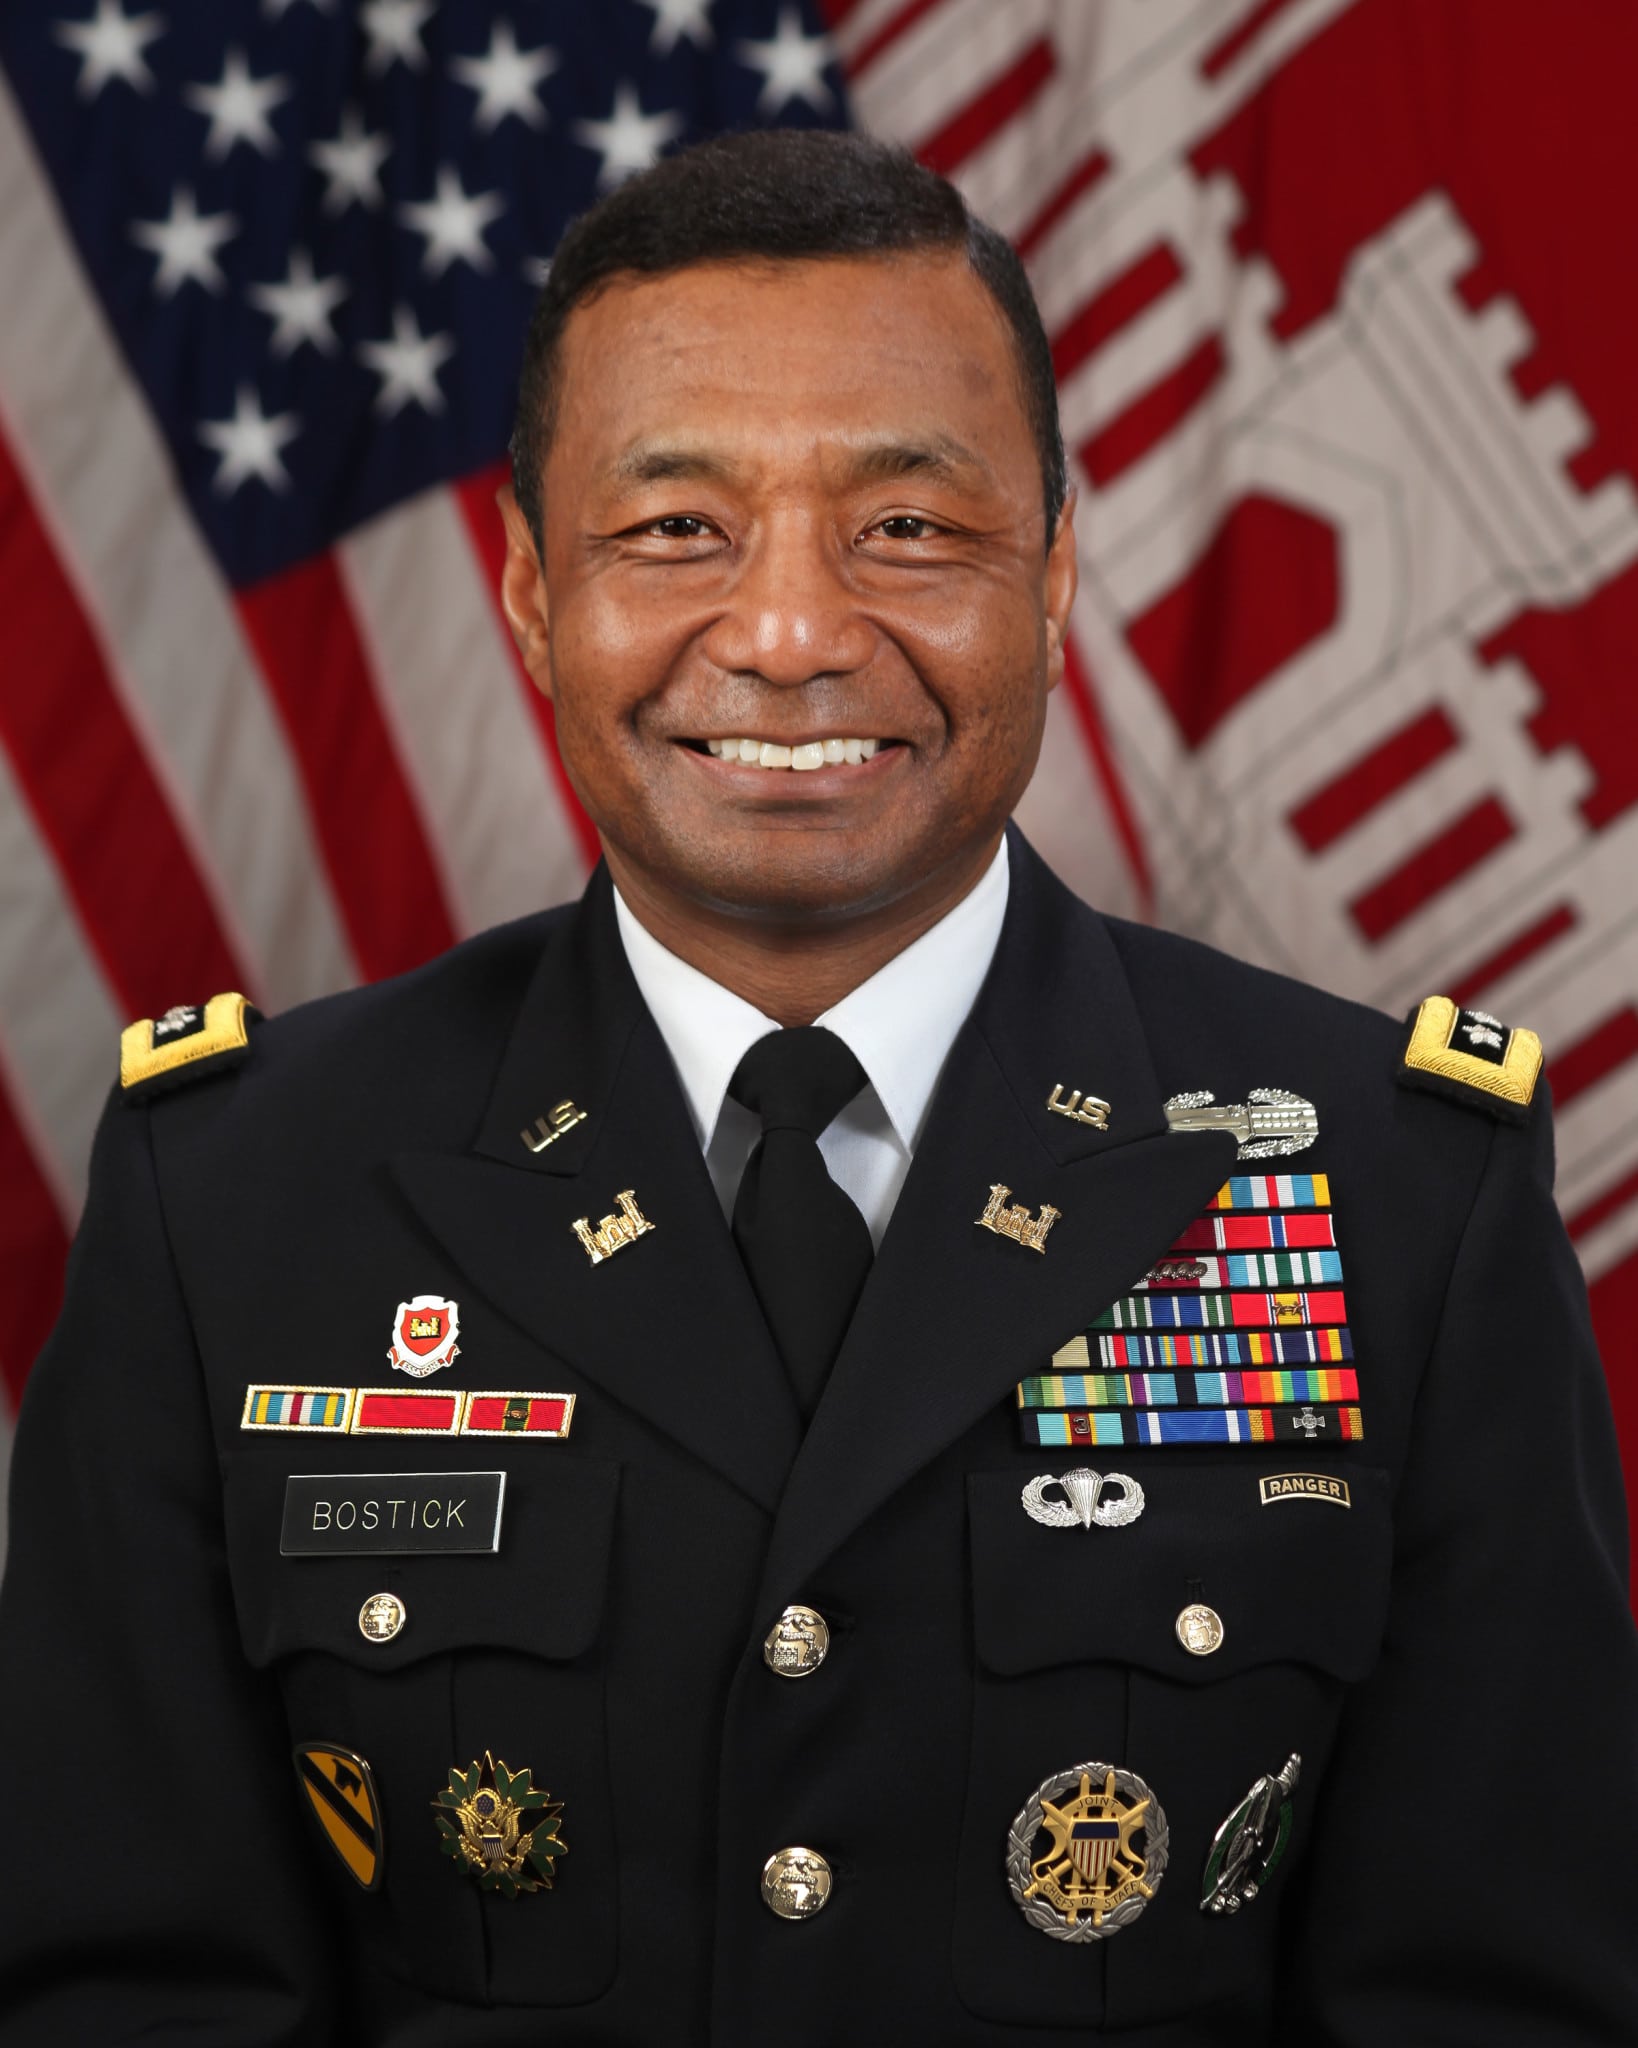 LTG Thomas P Bostick 2012 Army Core Of Engineers1 